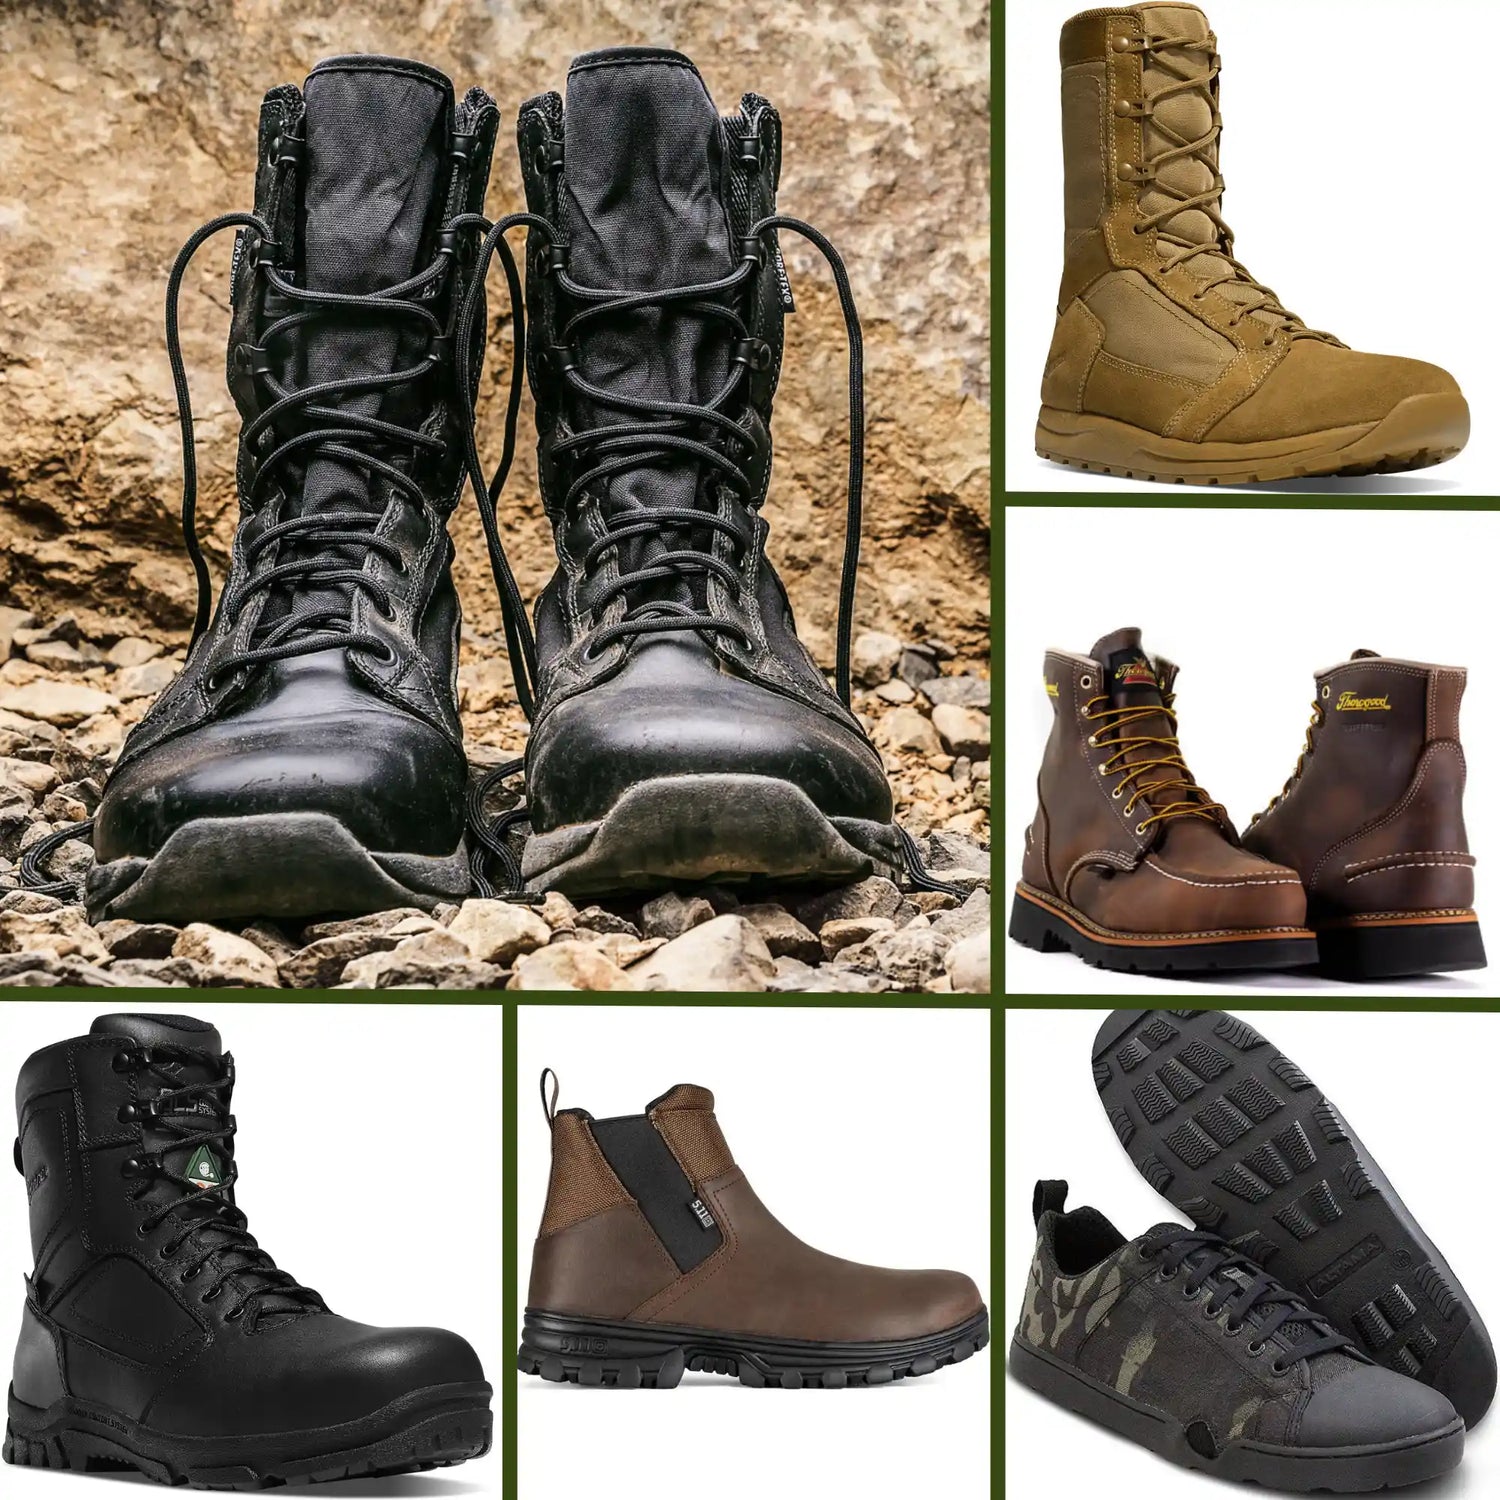 Military, hiking & work boots